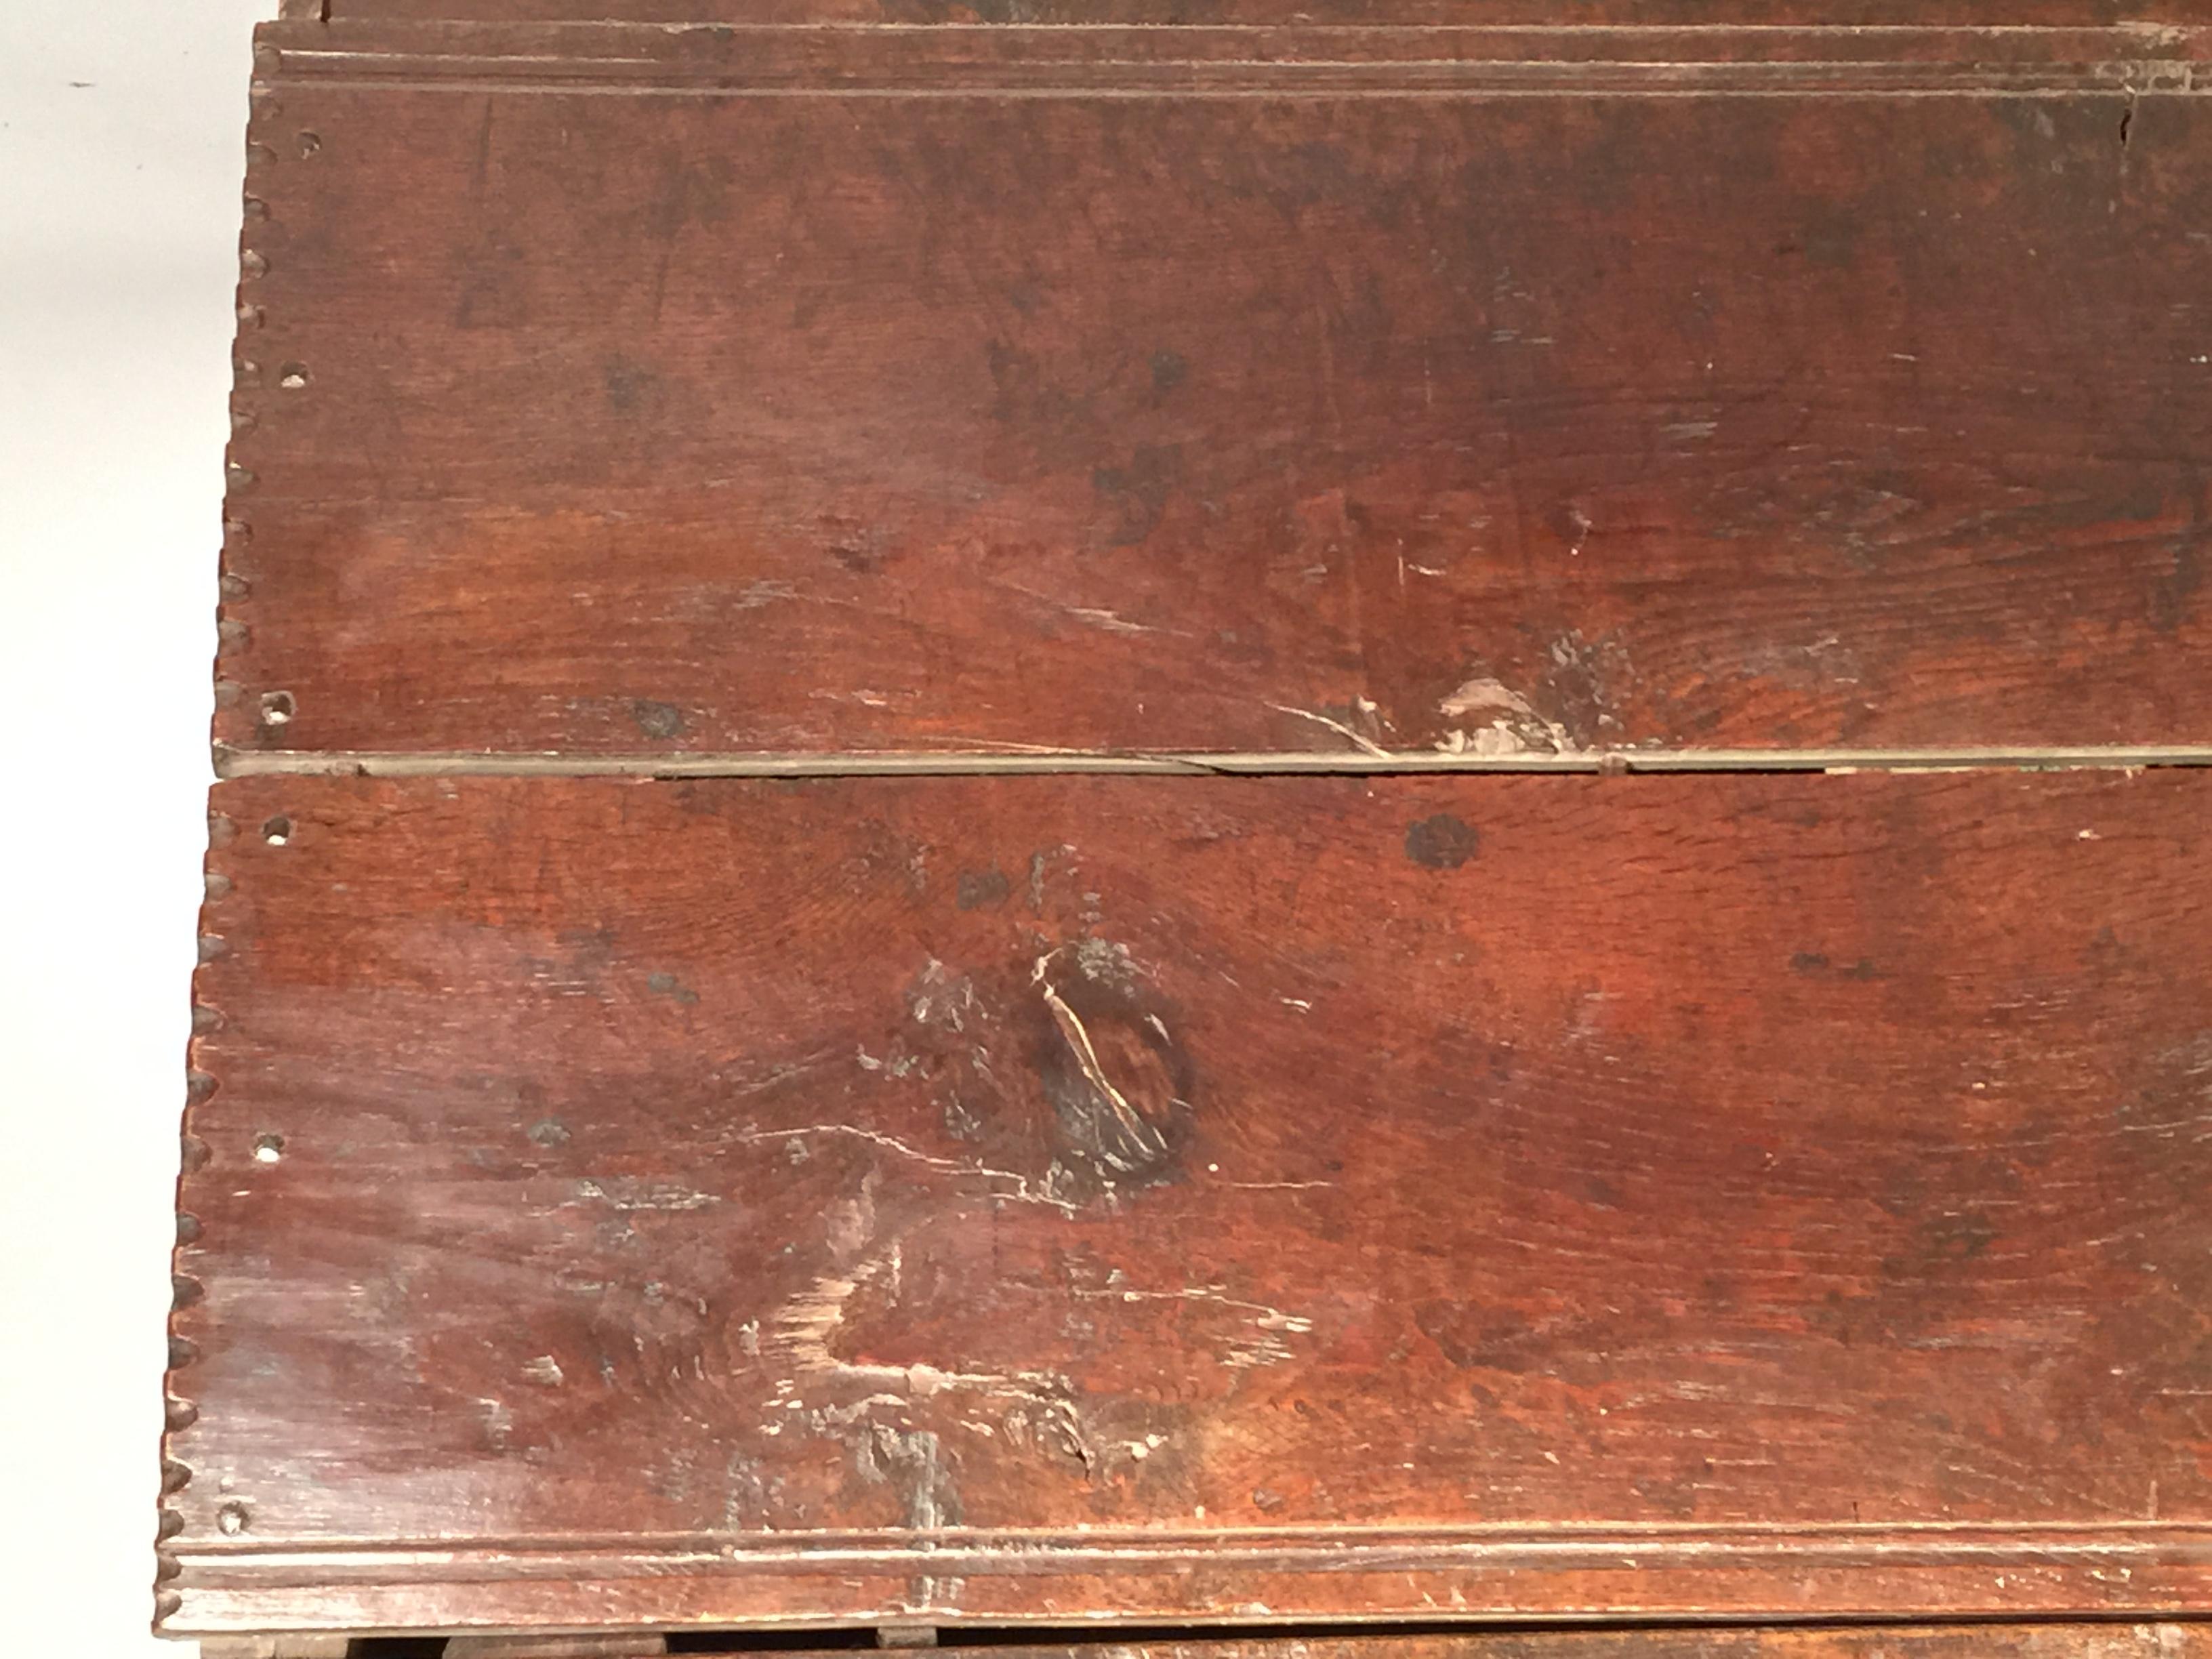 Large oak armourer’s, sword chest or coffer, circa 1600. Excellent old patina and superb colour and in very good overall state for an item some 400+ years old.
A rare and unusually large English iron bound oak boarded armourer’s chest or coffer of